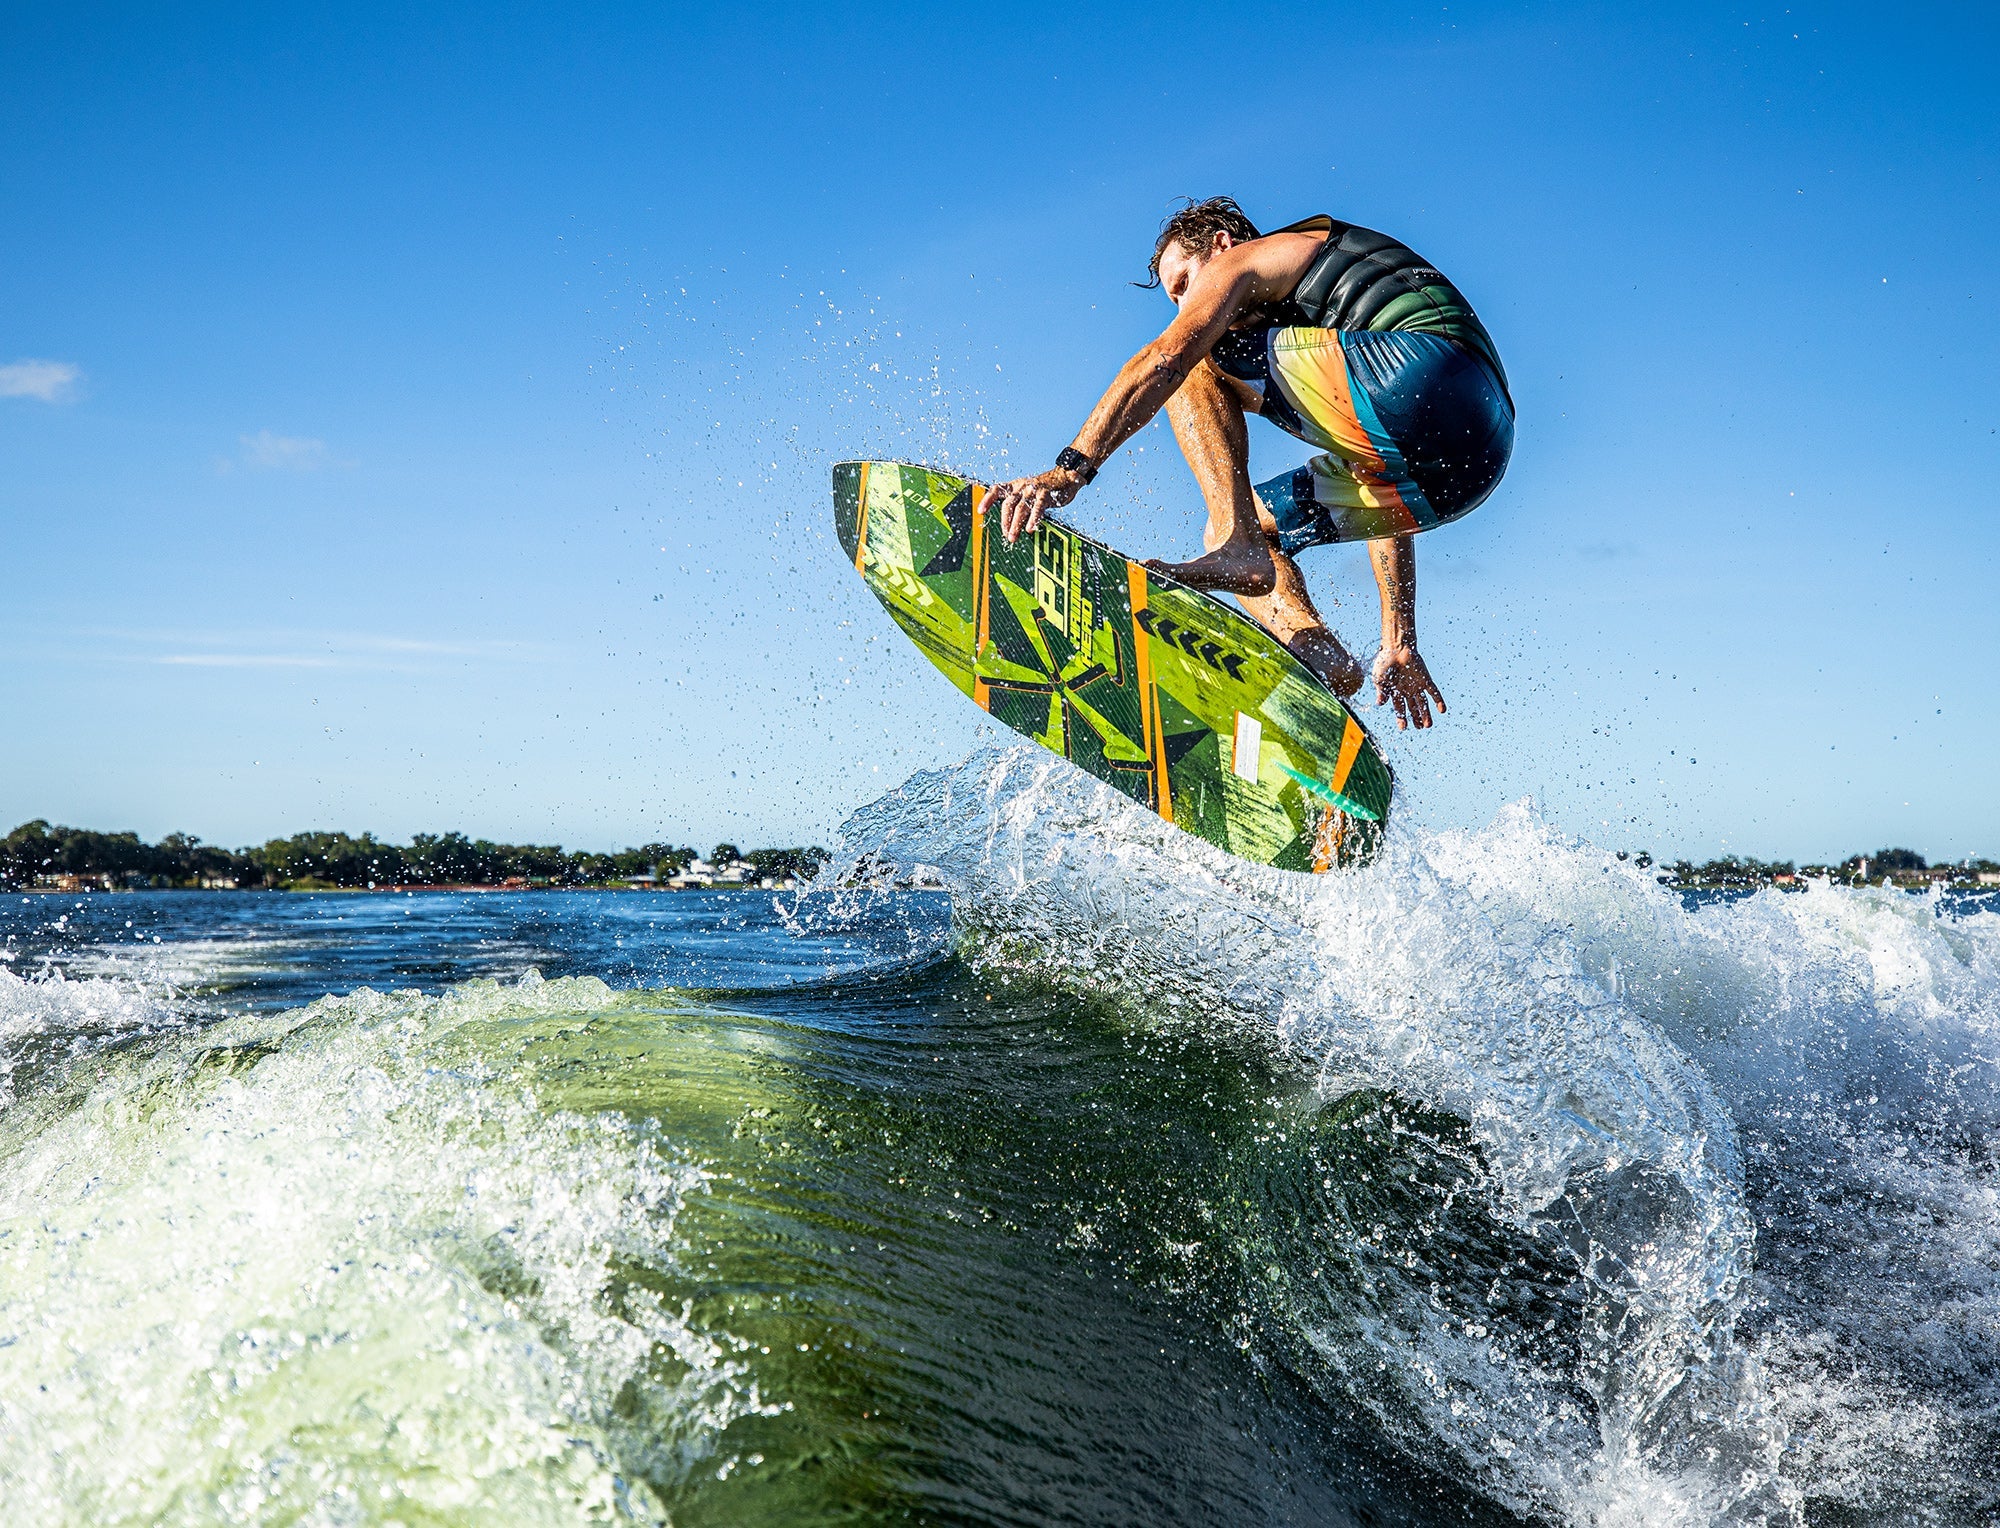 How-To: 360 on a Wakesurf Board – WakeMAKERS